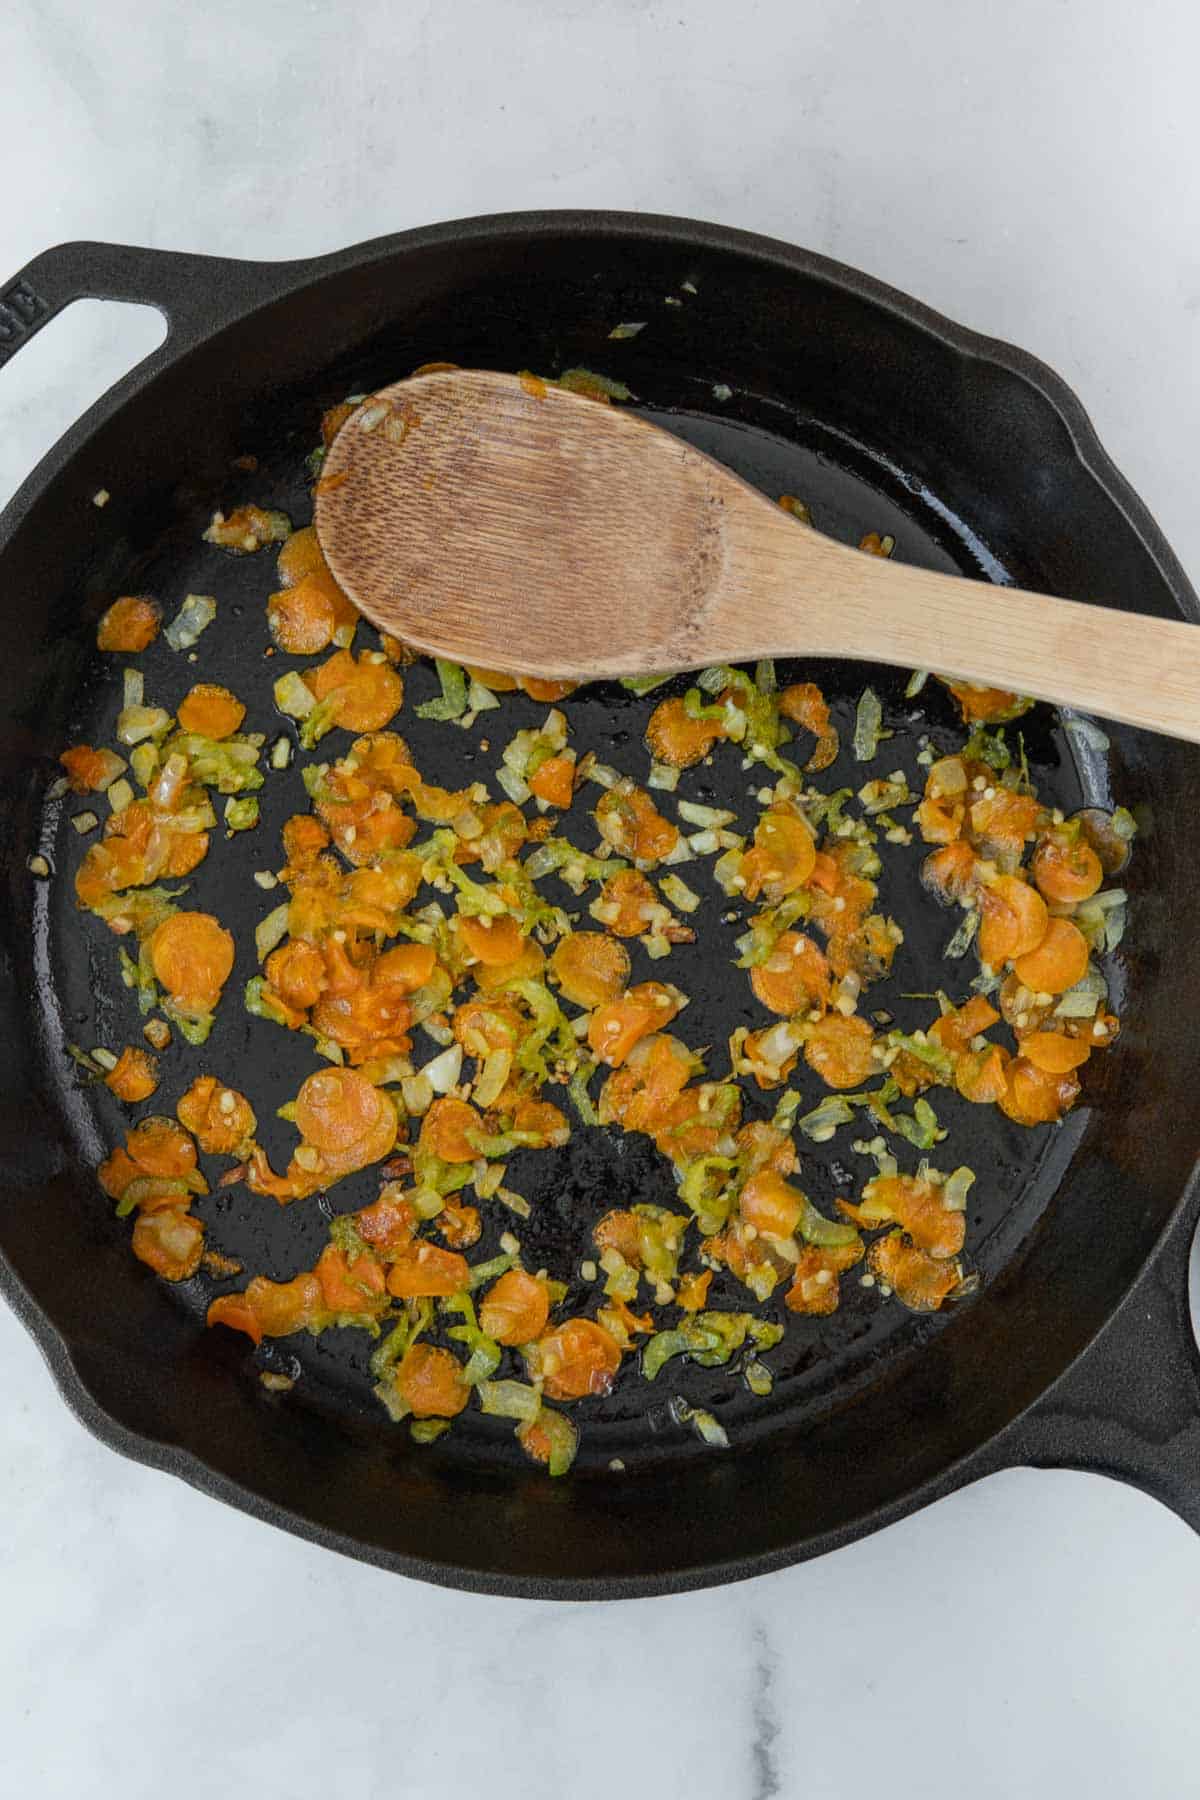 sliced carrots, celery and onions in a pan